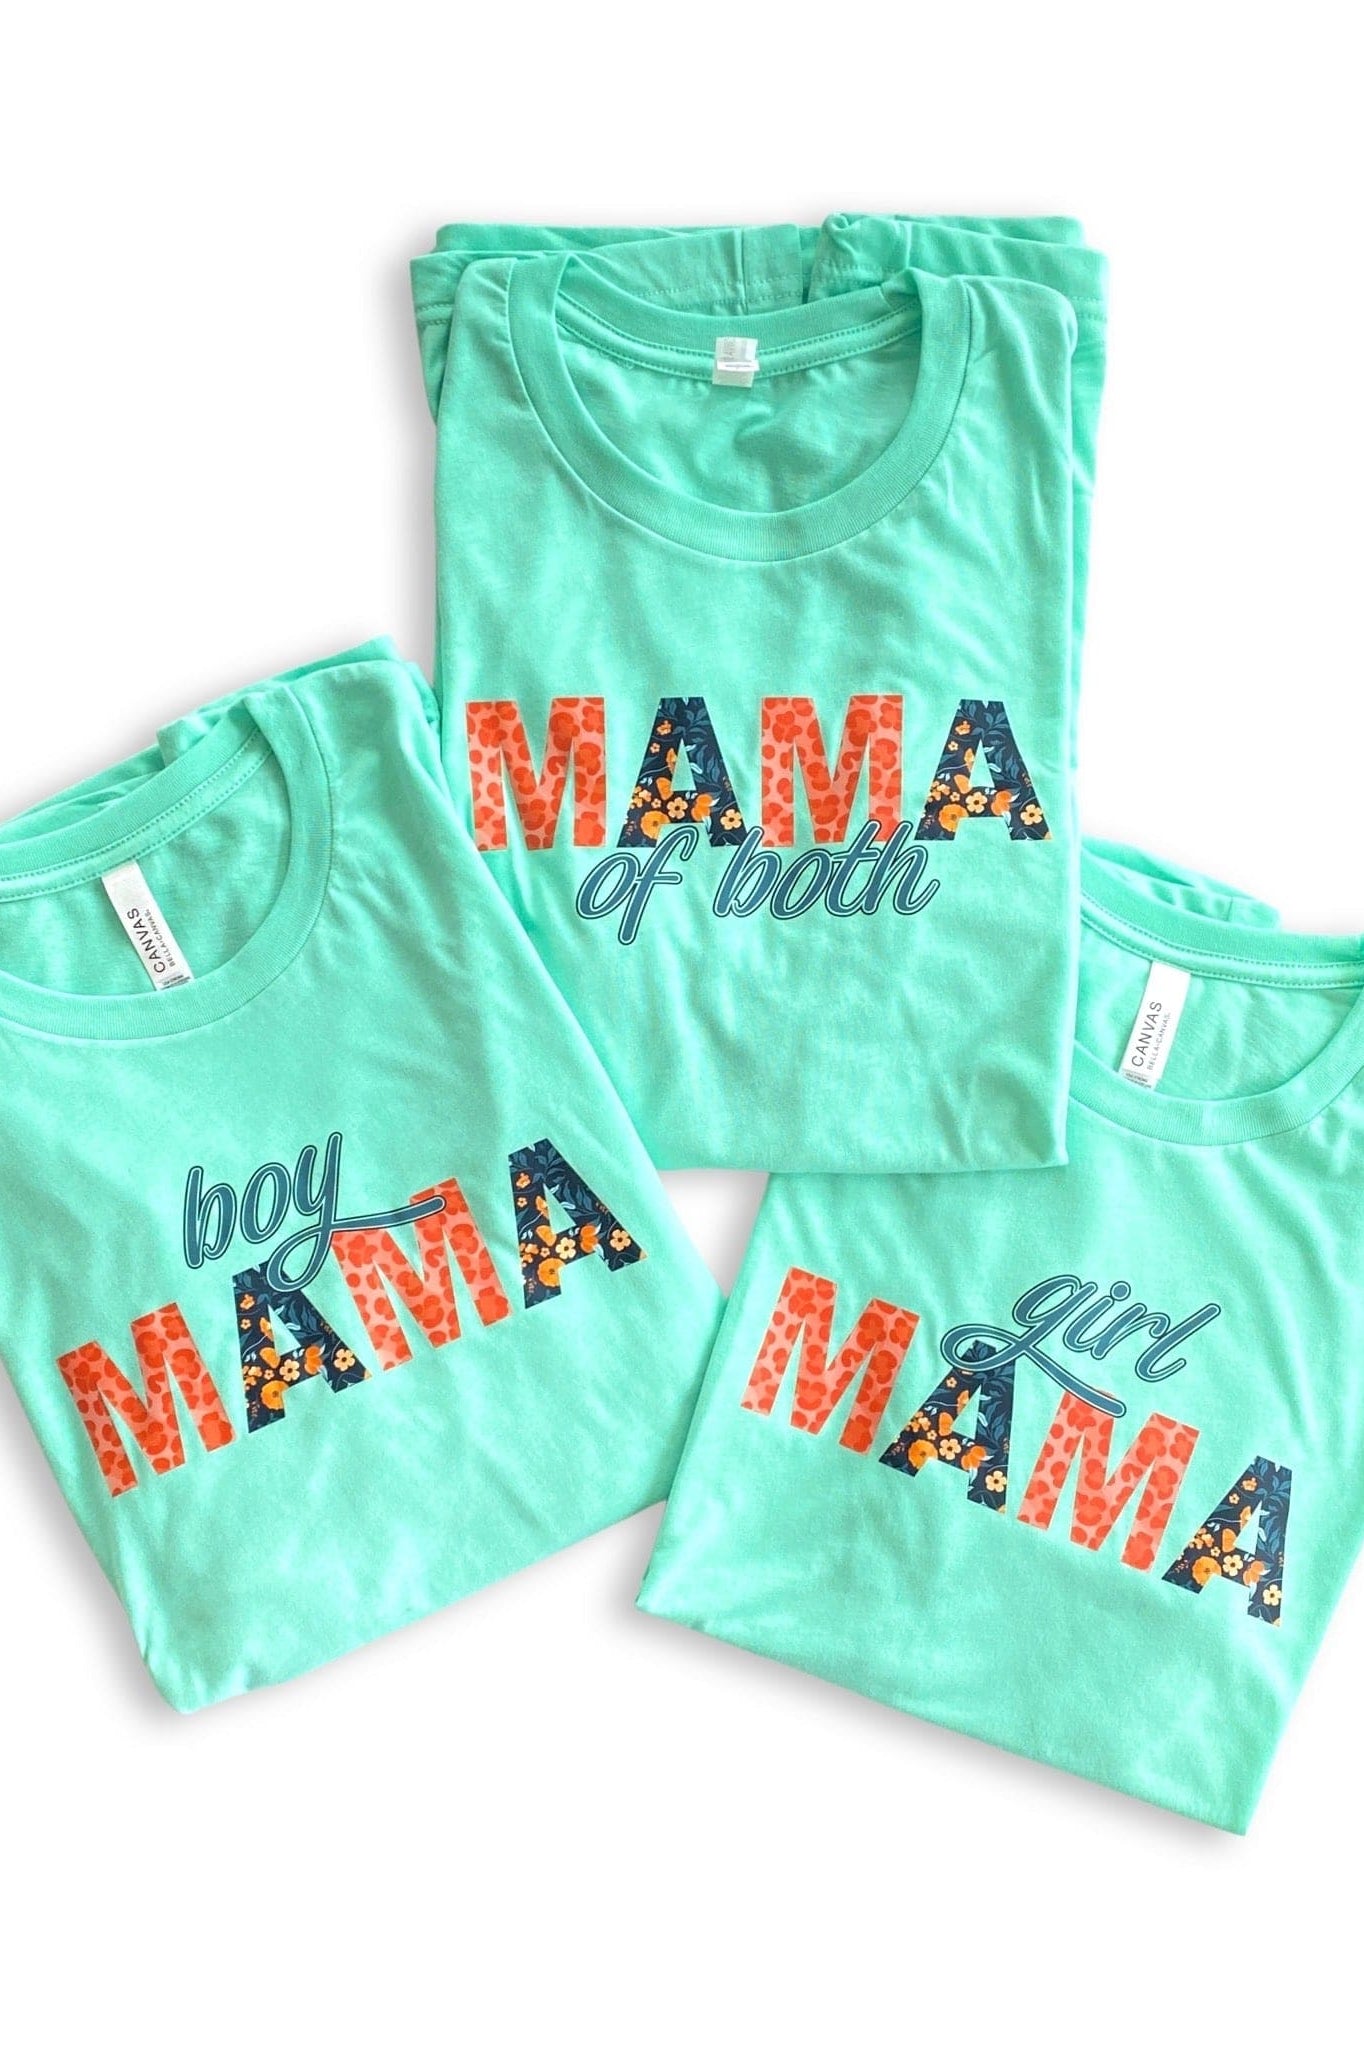 Boy Mama Graphic Tee-BT Graphic Tee-Stay Foxy Boutique, Florissant, Missouri